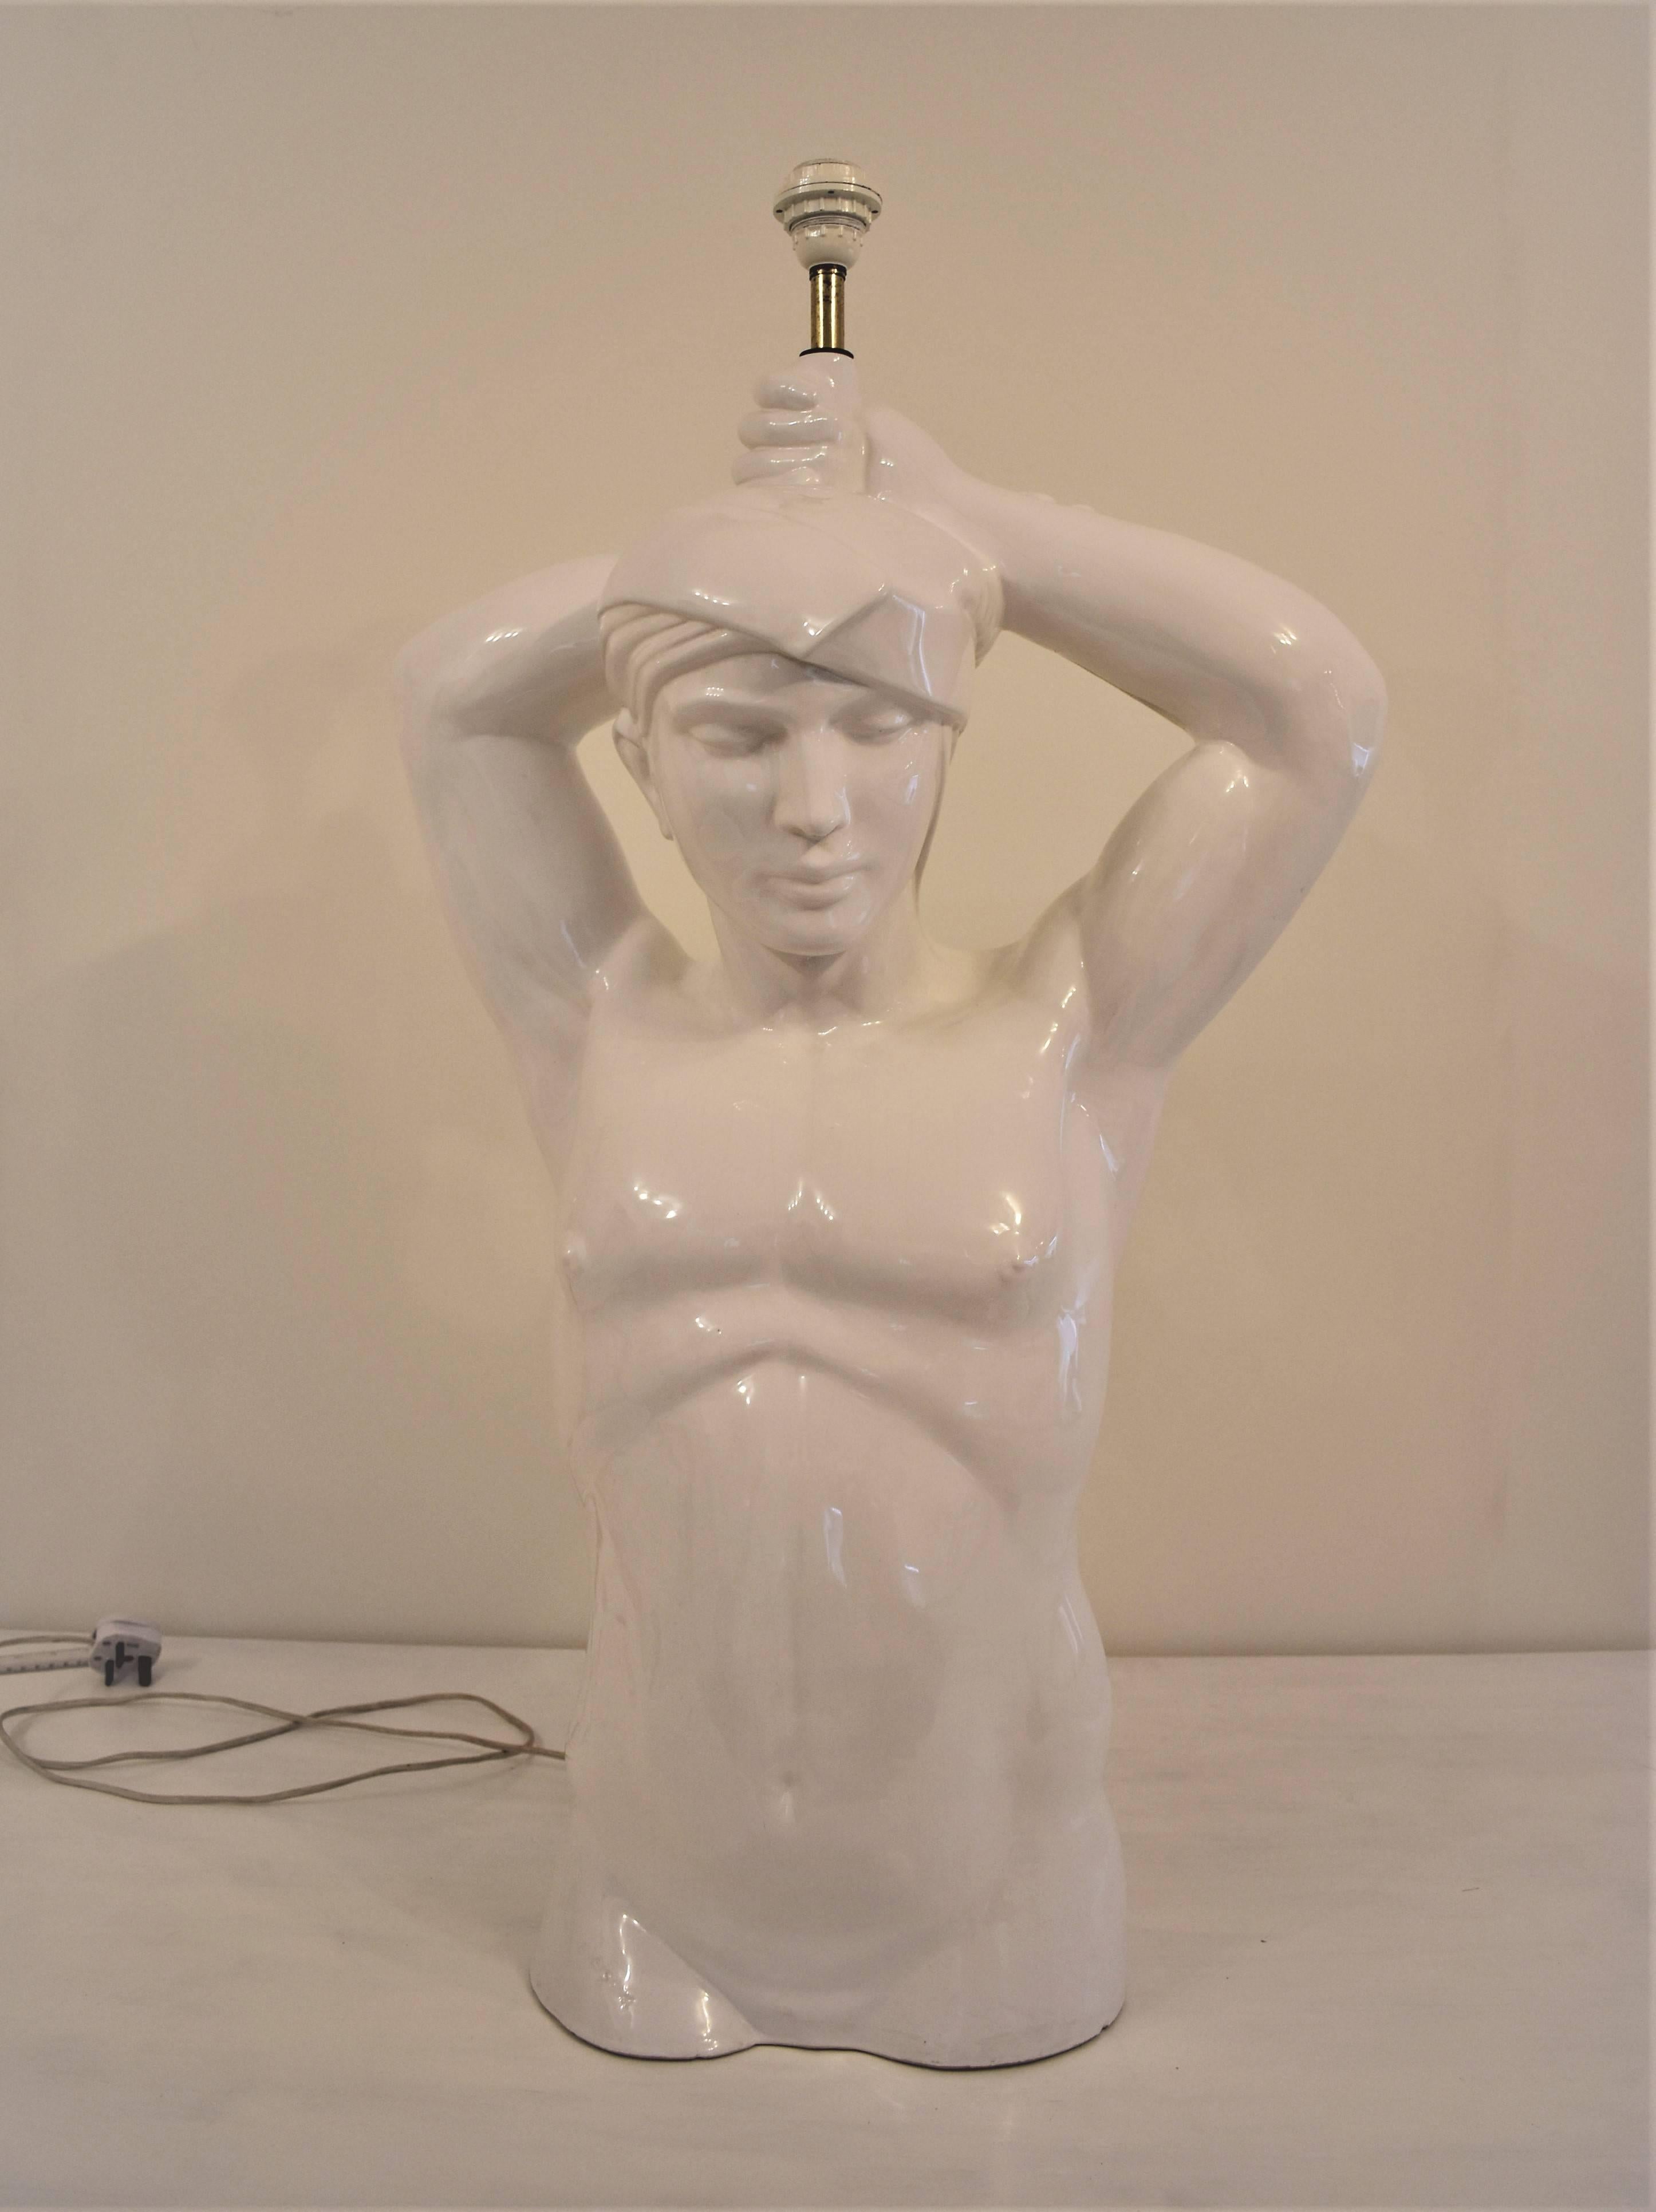 Giulio Ciniglia signed sculpture of a nude torso of a man in white glazed ceramic. Life size male figure in Art Deco style. Arms raised holding a lamp over his head. With a large original lampshade in silk. The lampshade is not in a good condition,